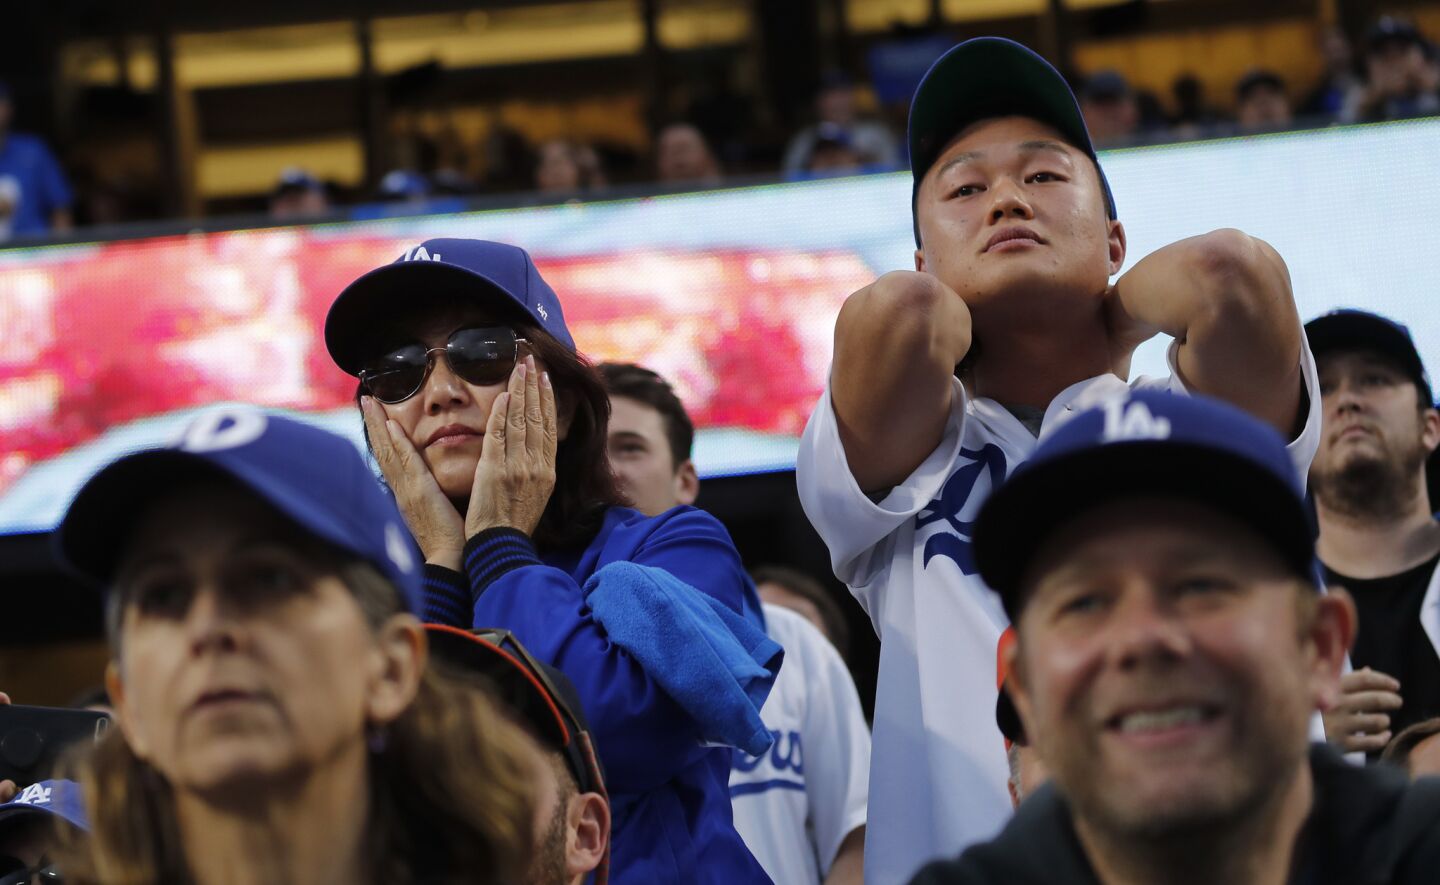 Dodgers fans show concern as the Astros score twice in the first inning of Game 7.